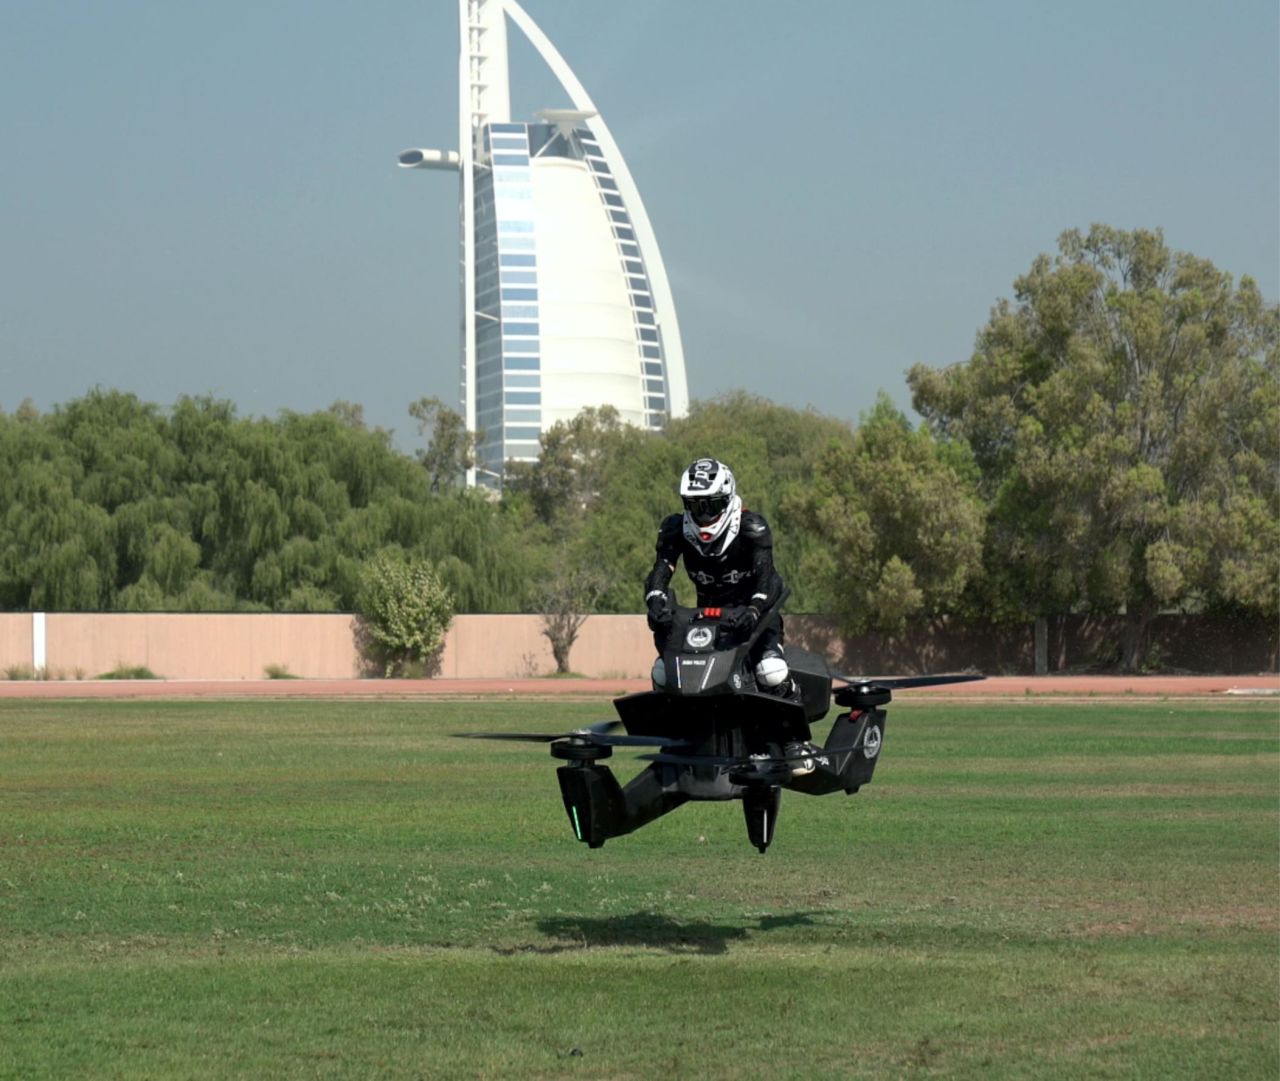 General Director of Dubai Police's artificial intelligence department Brigadier Khalid Nasser Alrazooqi says he sees the electronic vertical landing and take off vehicle (eVTOL) as a potential first-responder unit.